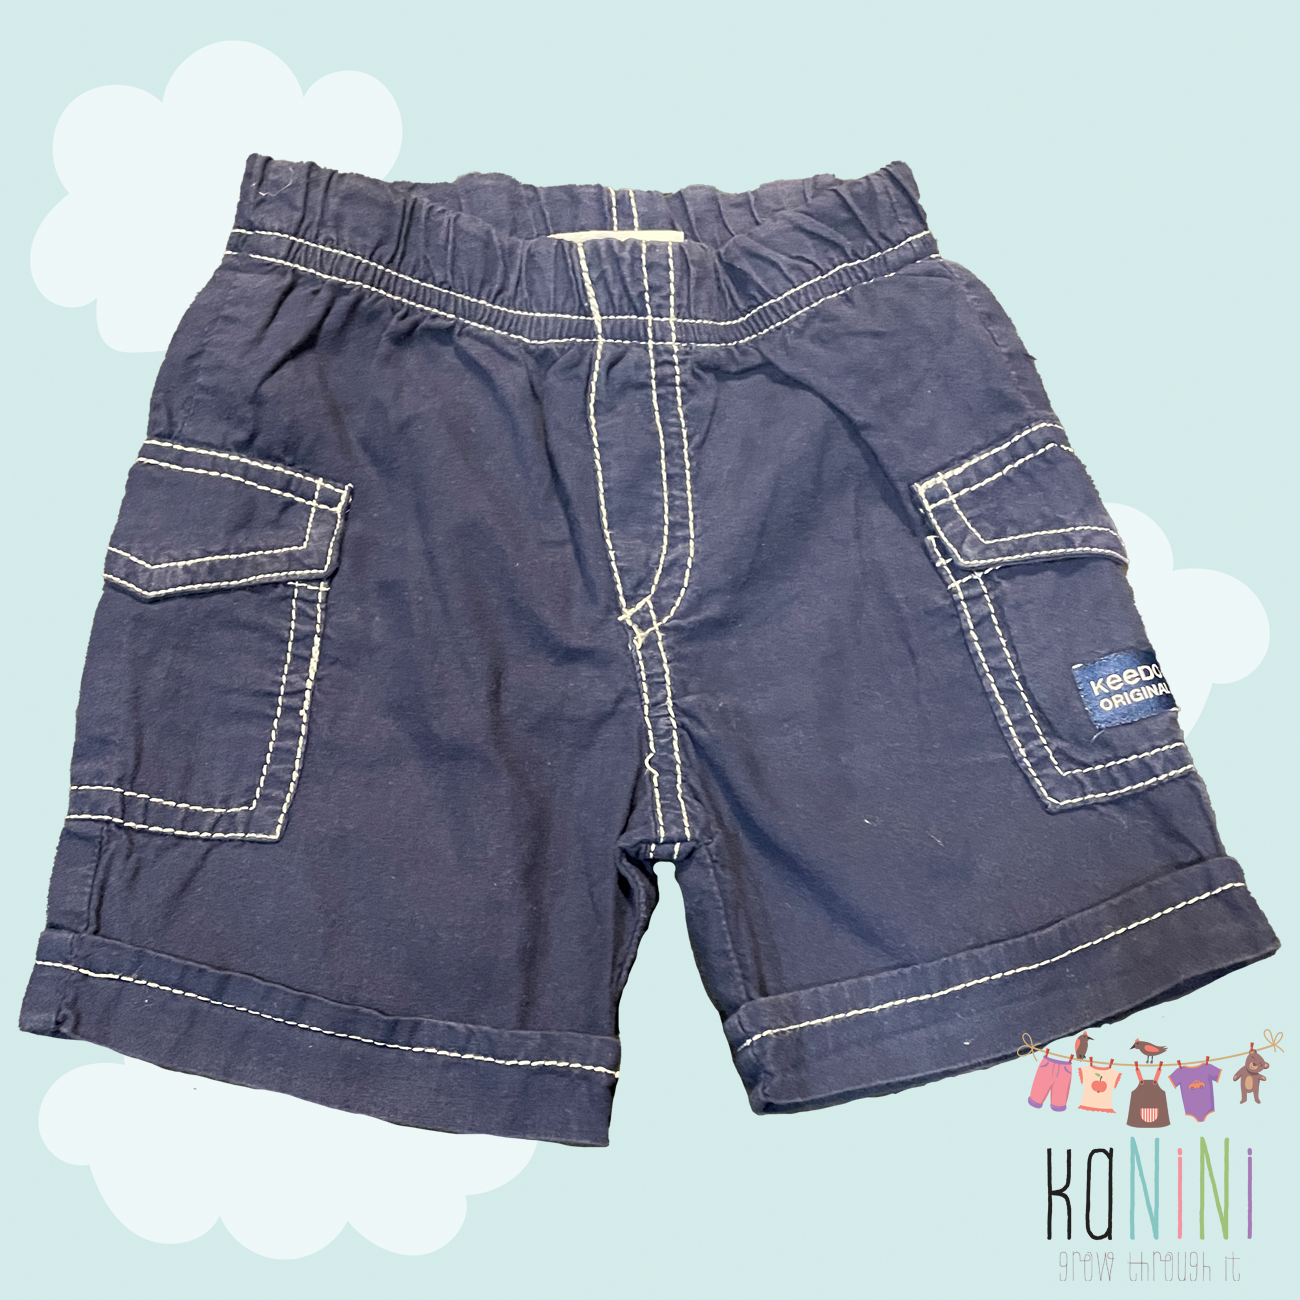 Featured image for “Keedo 6 - 9 Months Boys Navy Shorts”